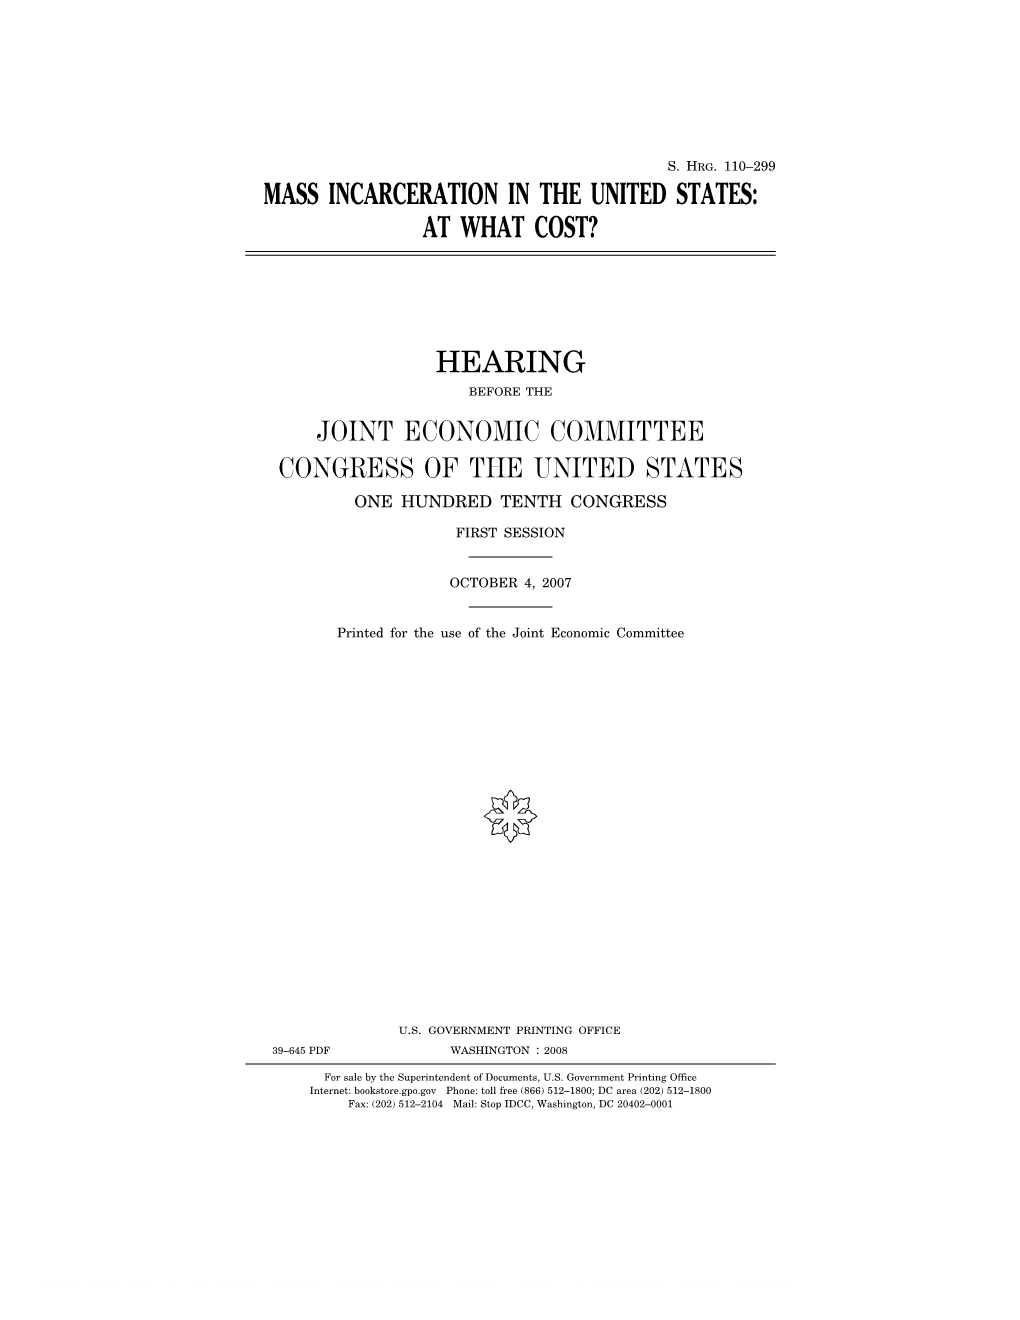 Mass Incarceration in the United States: at What Cost? Hearing